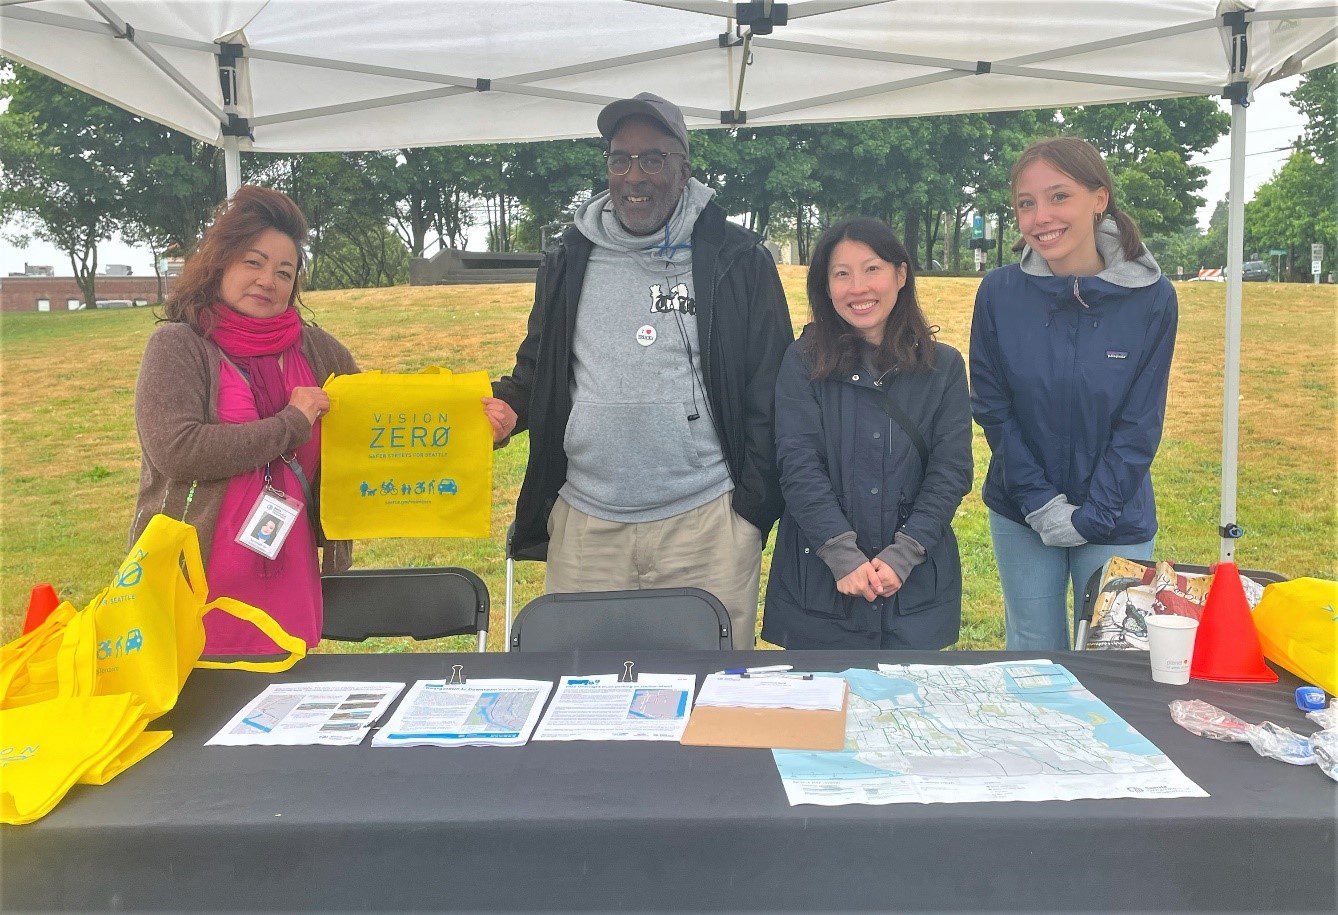 4 members of our staff stand behind the SDOT event table and smile at the camera. Two of them hold up a Vision Zero tote back between them.